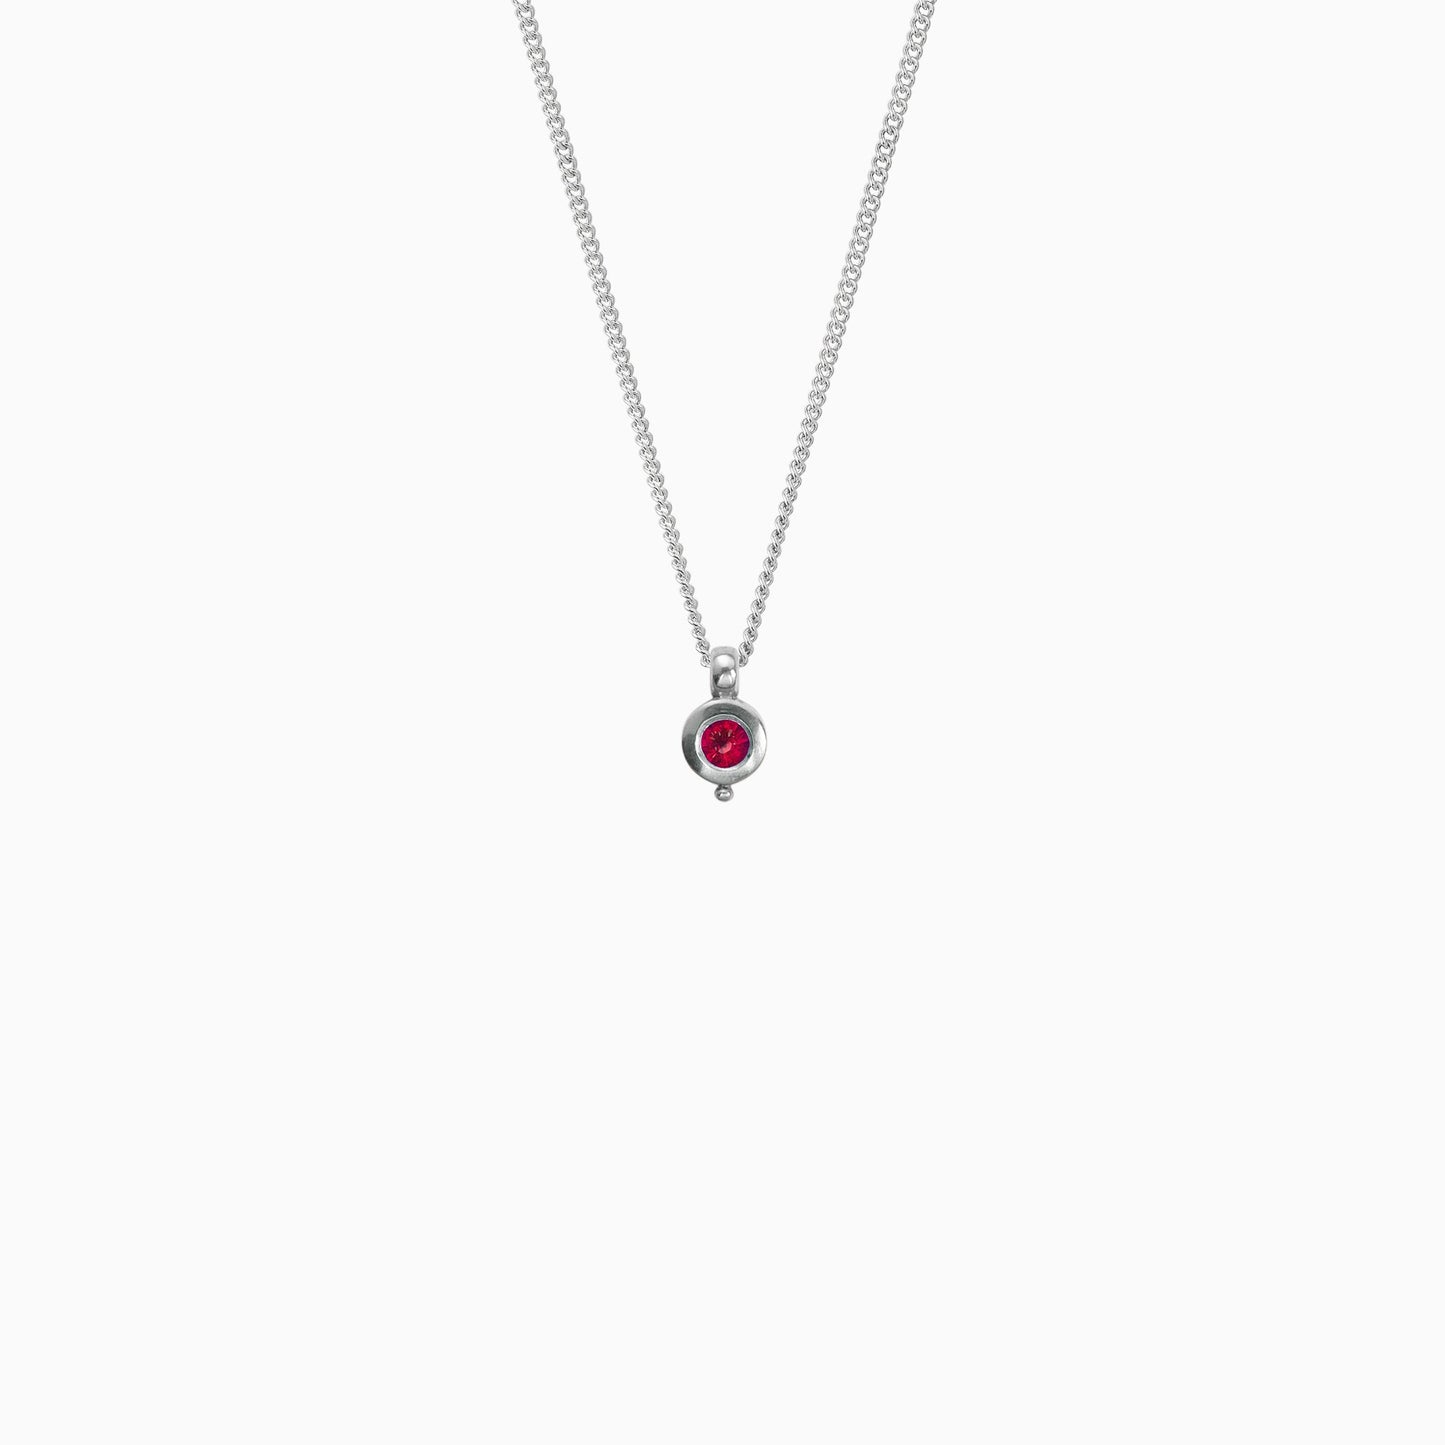 Recycled platinum round pendant 12mm  x 7mm with small round bead attached below on a 45cm fine curb chain. Set with a 4mm round ruby.